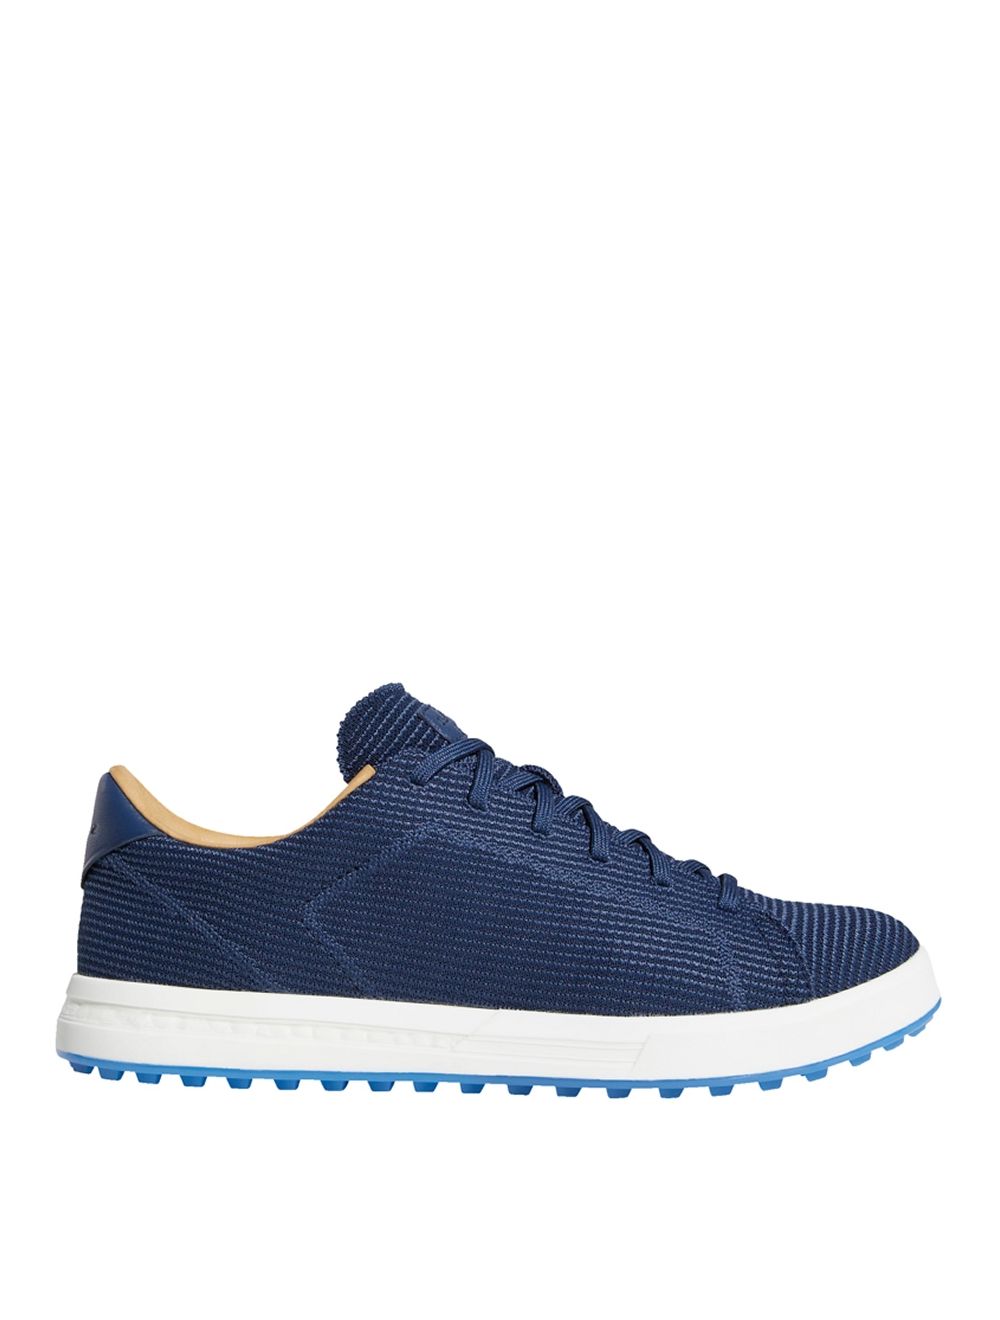 navy blue golf shoes